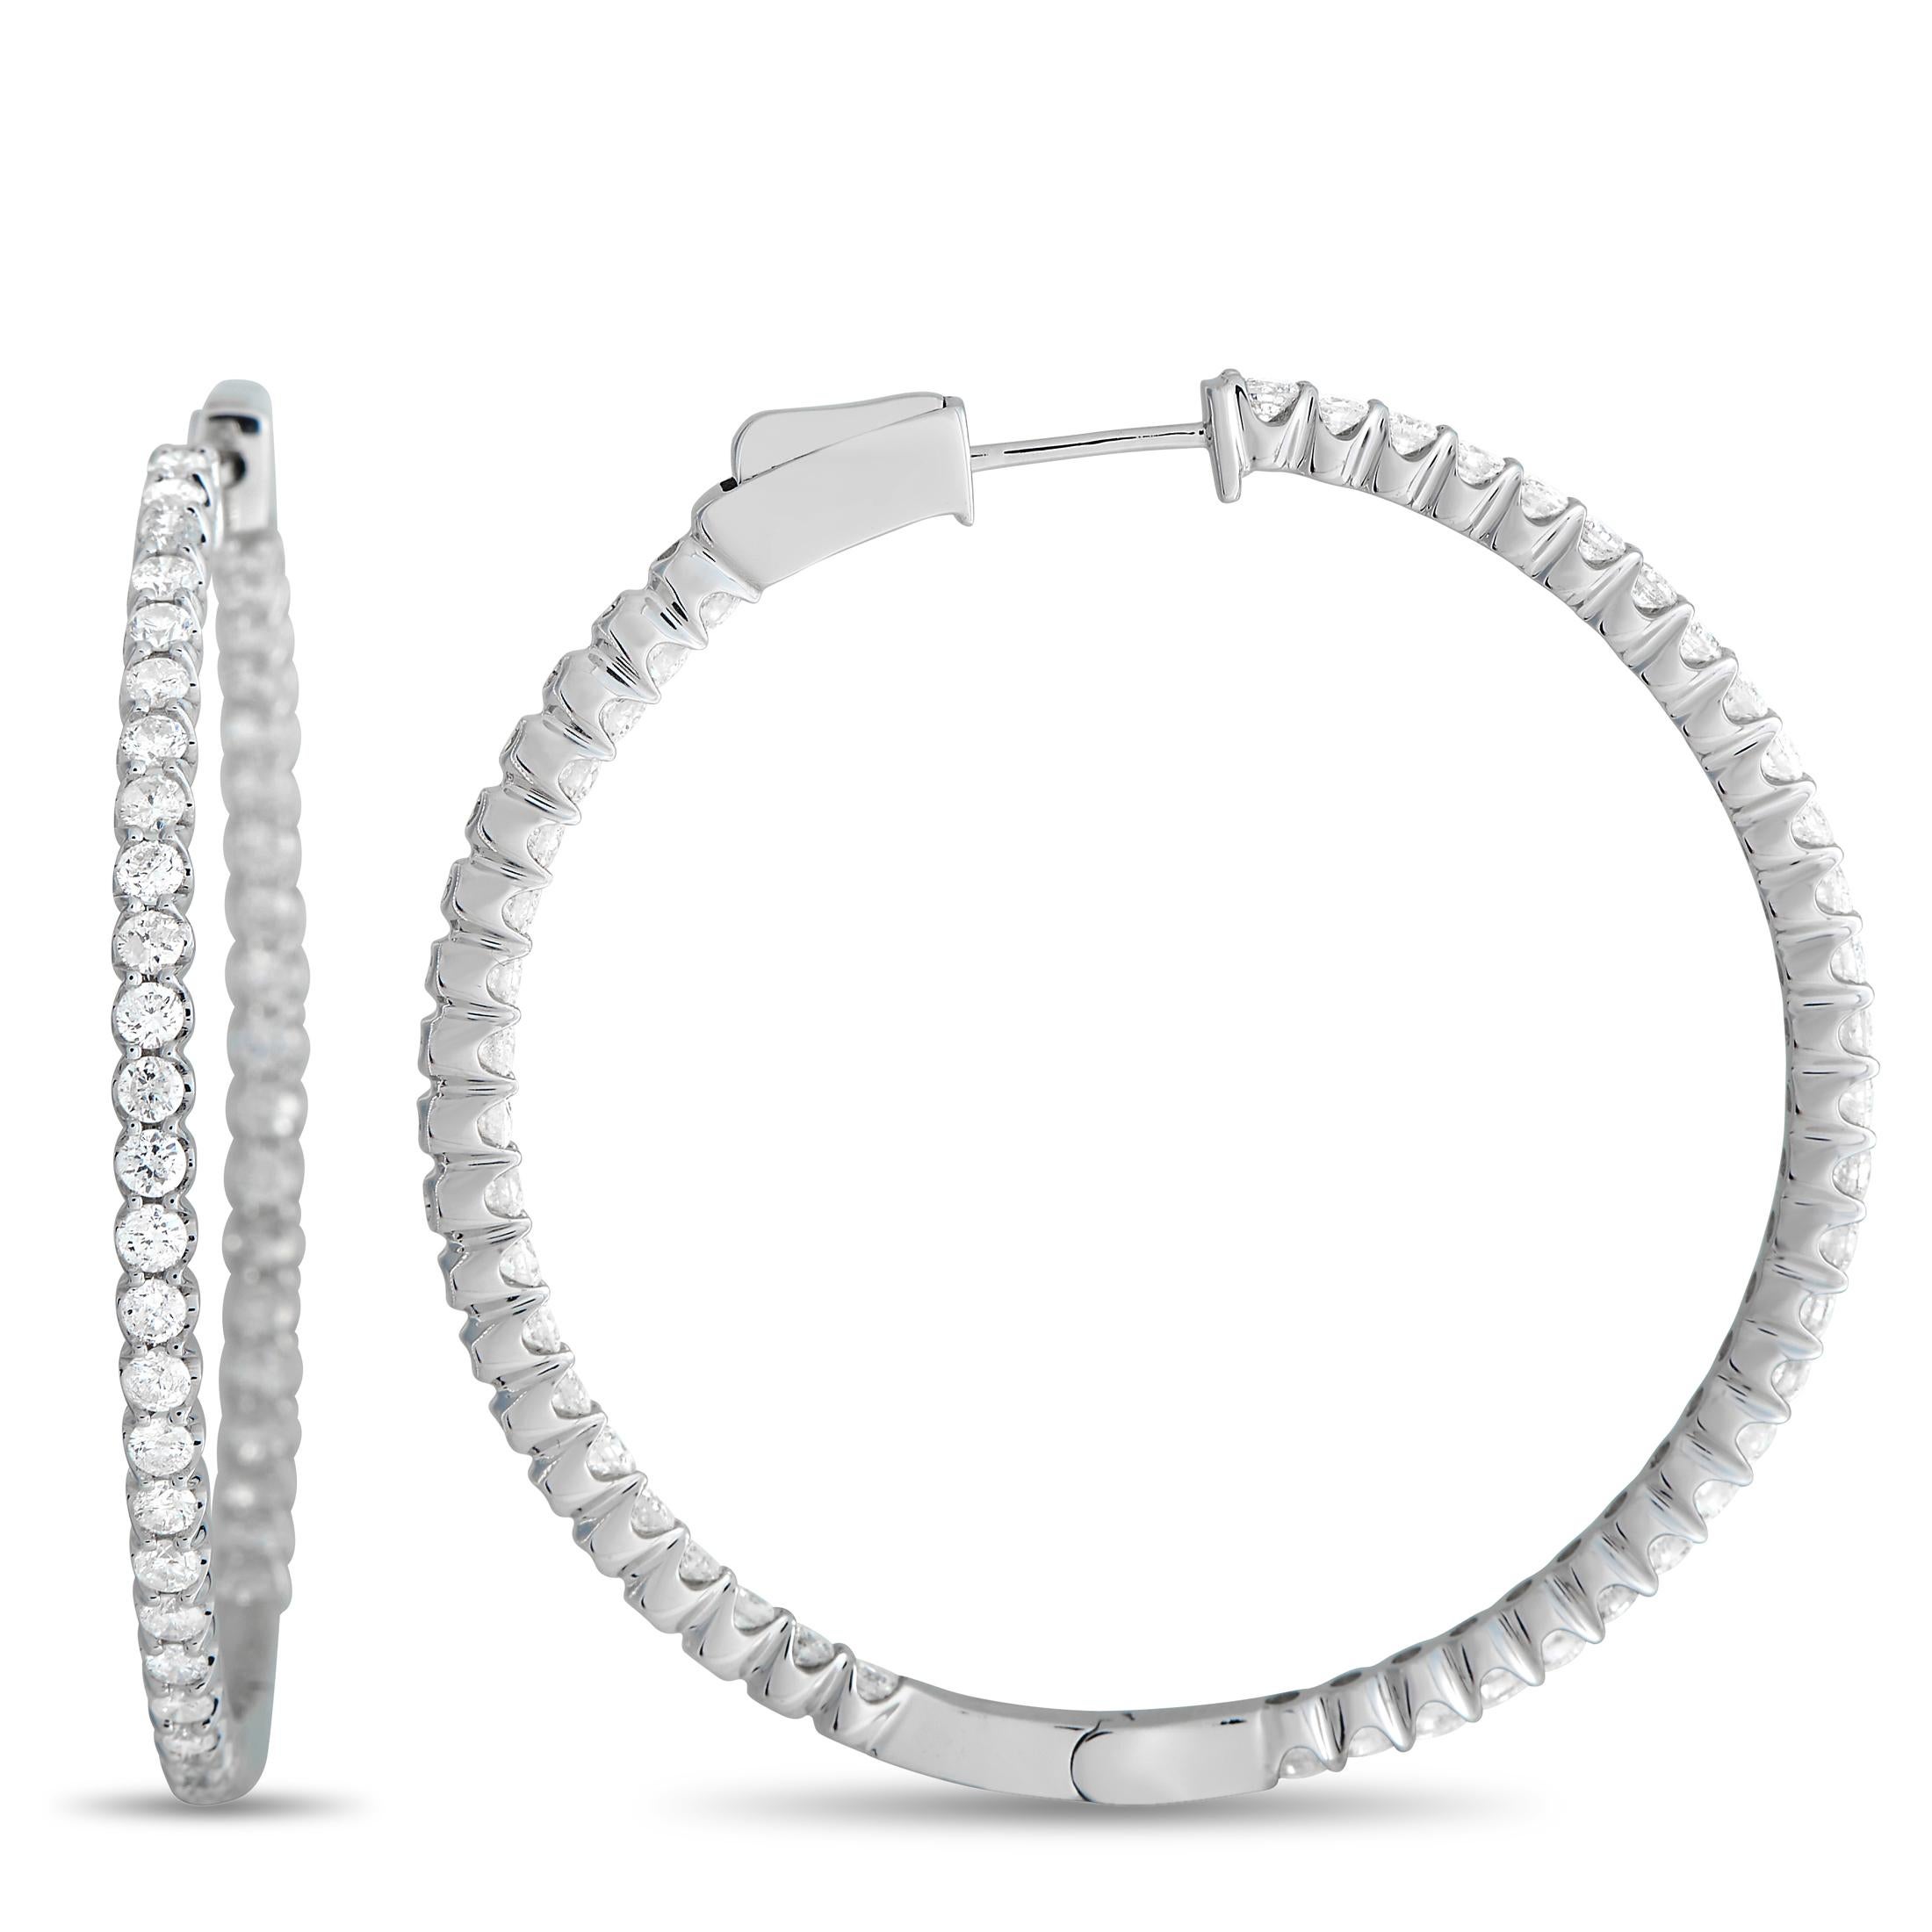 Sparkly and slim, these diamond-encrusted hoop earrings will instantly polish your outfits. Each hoop measures less than 2 inches in diameter and features a row of diamonds on its outer front surface and inner front-facing surface. 

This pair of LB